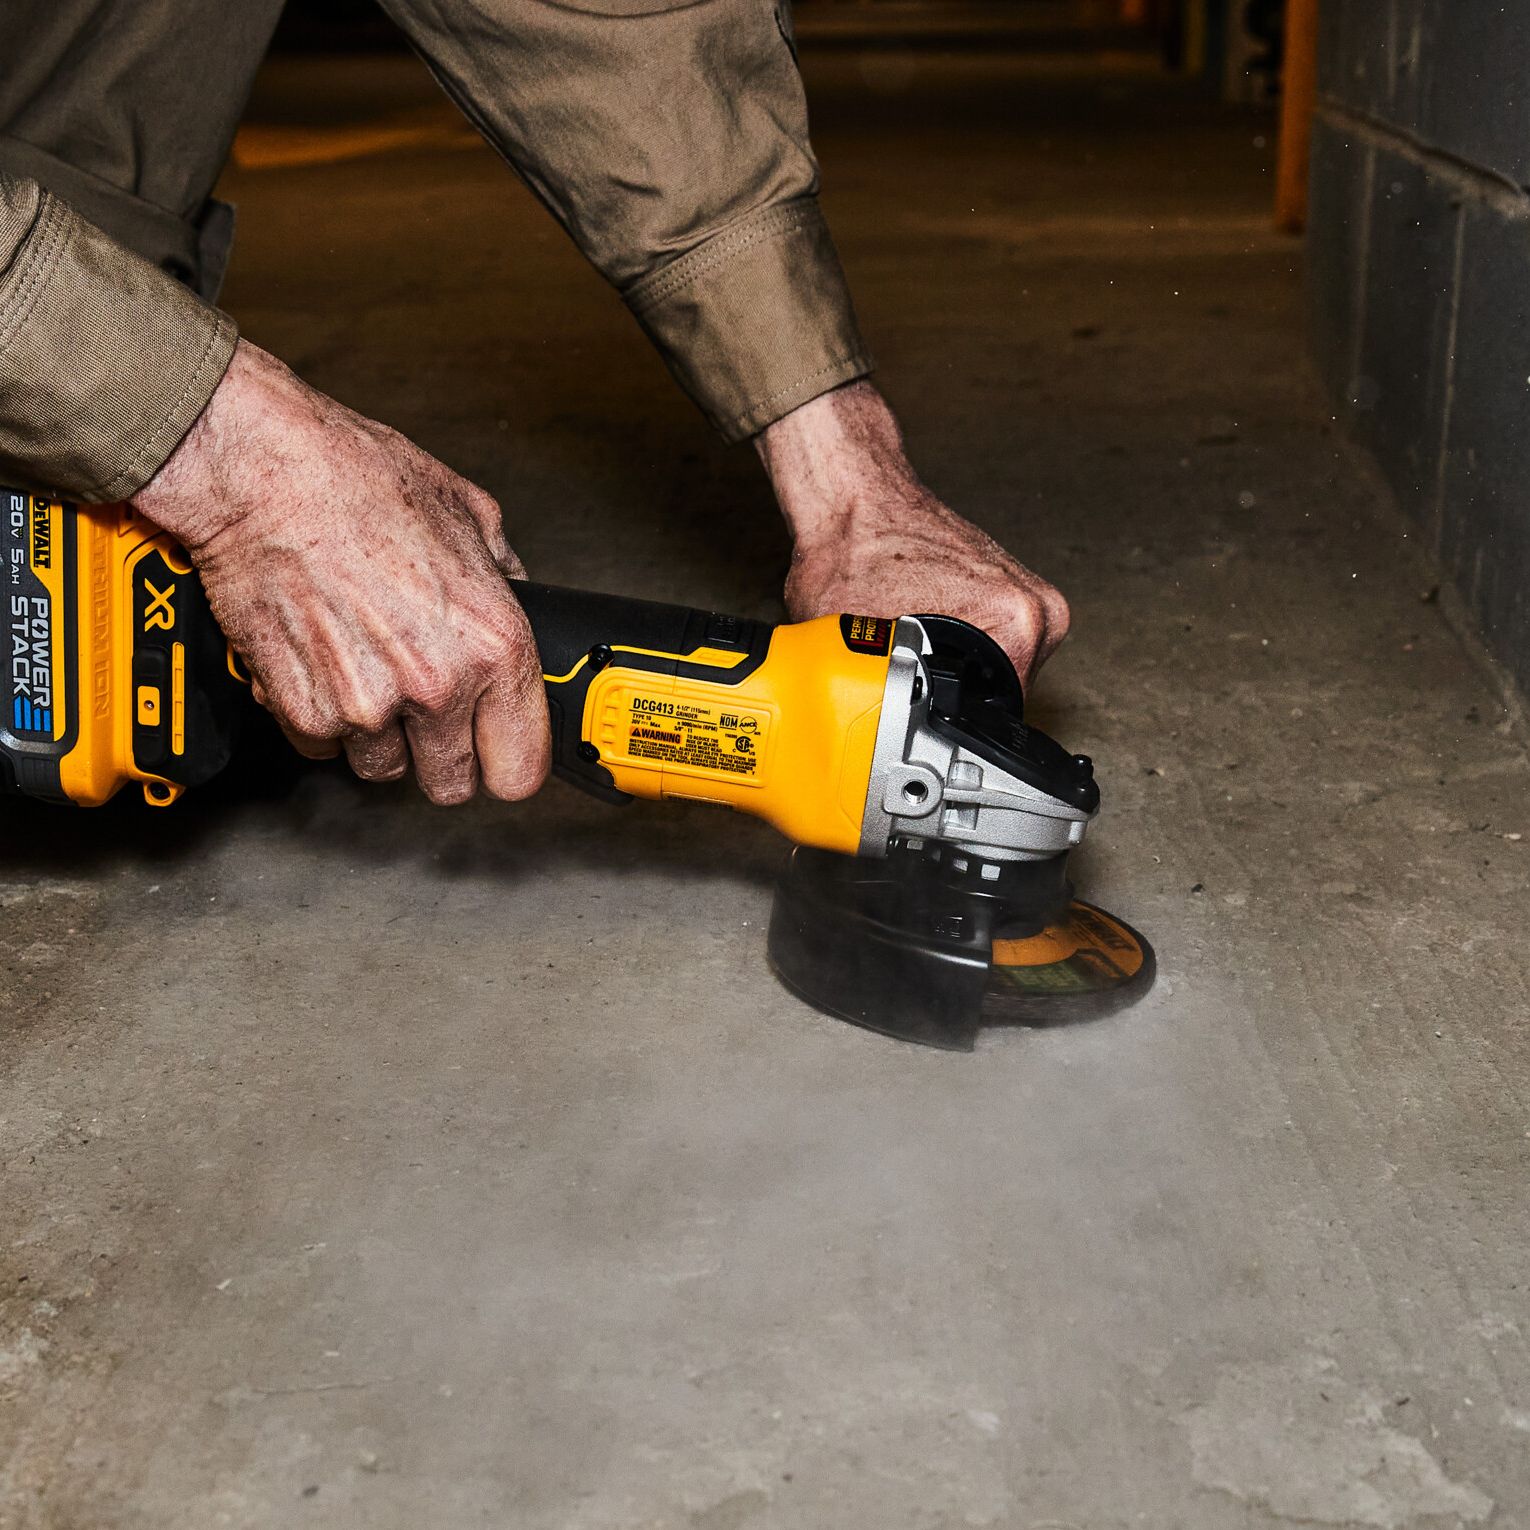 Safe and Fun Rules for Using an Angle Grinder